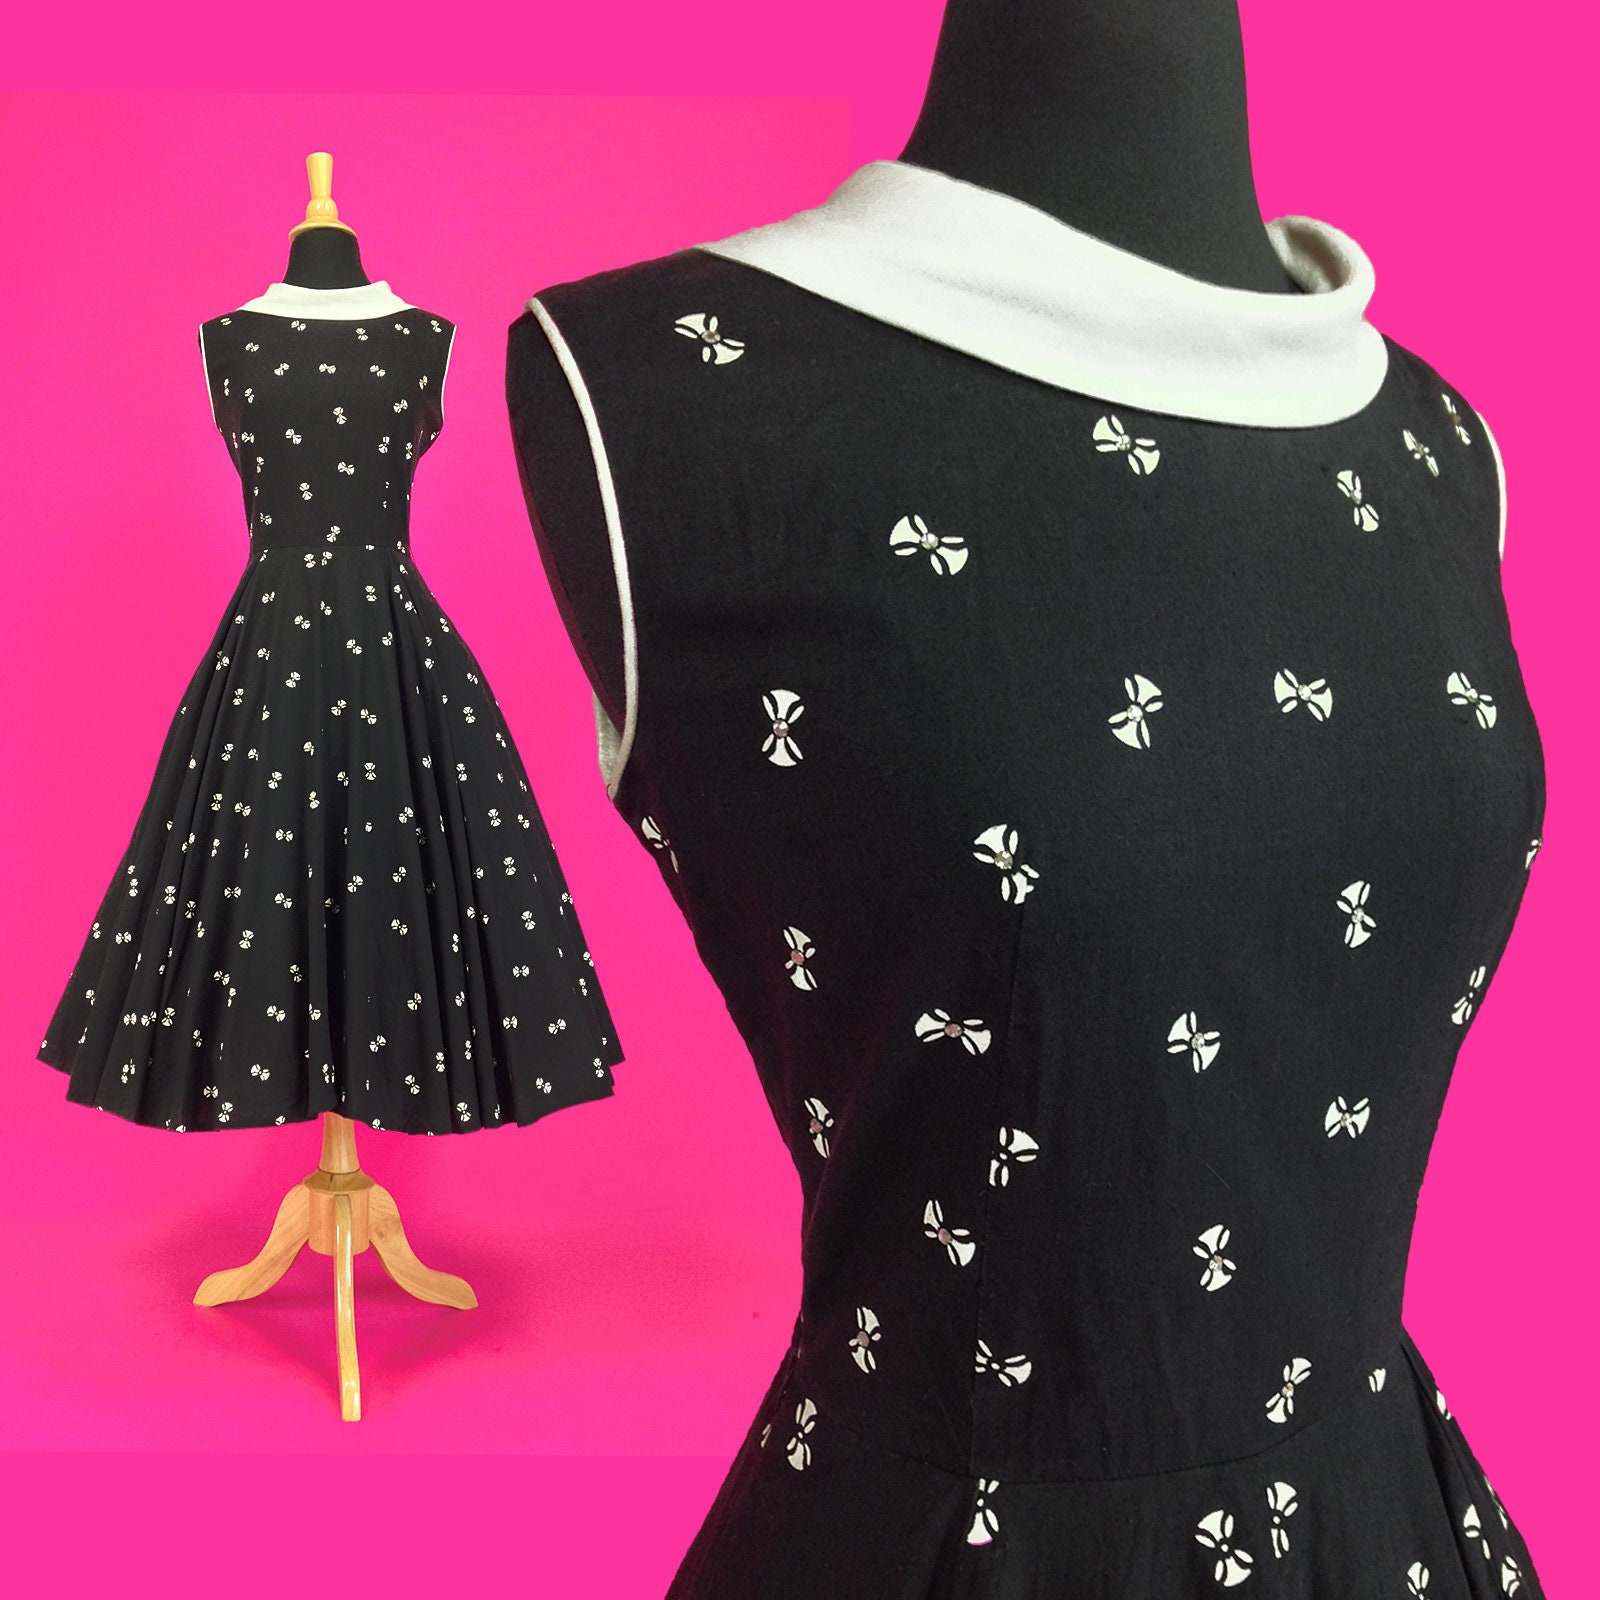 Vintage 50S Novelty Print Dress, 1950S Cocktail Pin Up Swing Rockabilly Full Skirt, Small, Size 4 6 Us, 8 10 Uk